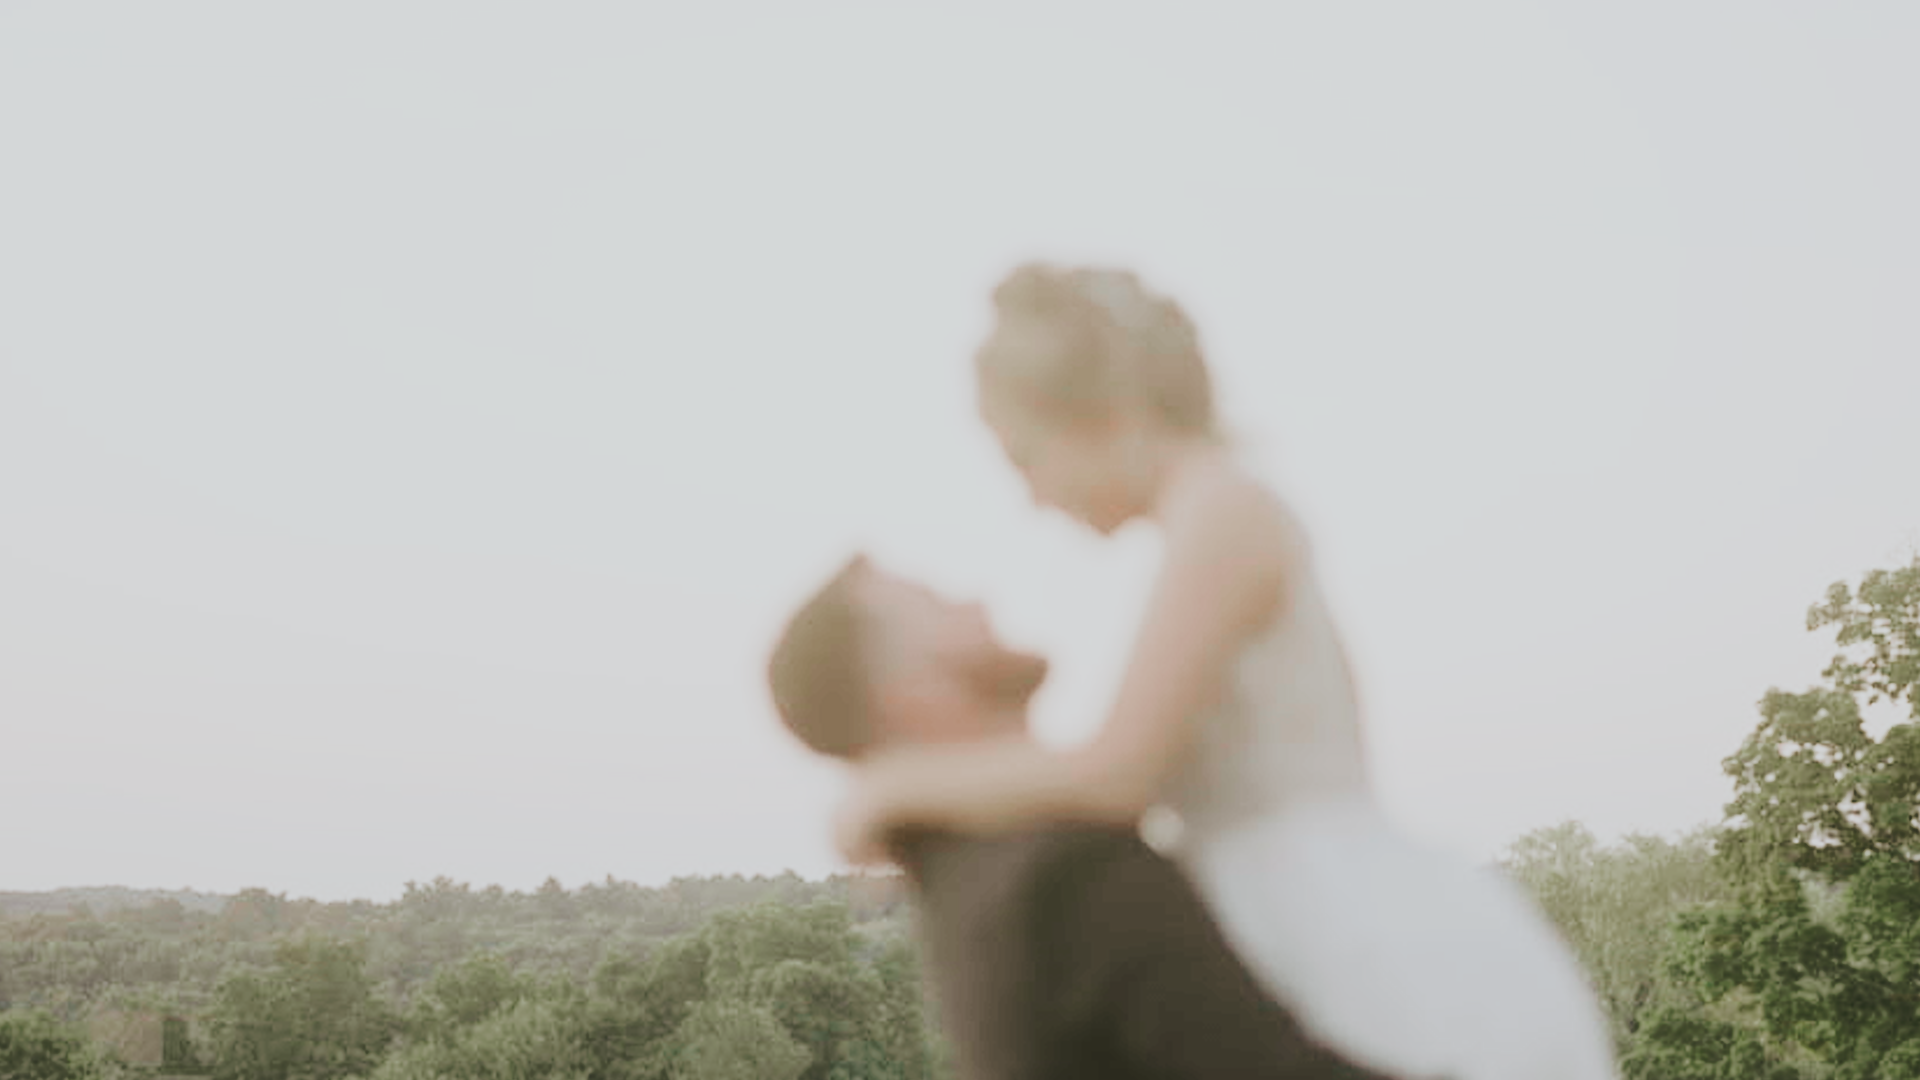  Katie is extraordinarily gifted at capturing the most personal sentiments. Katie created a wedding video for my friends' wedding that perfectly encapsulates their love, personalities, family, and friends. 